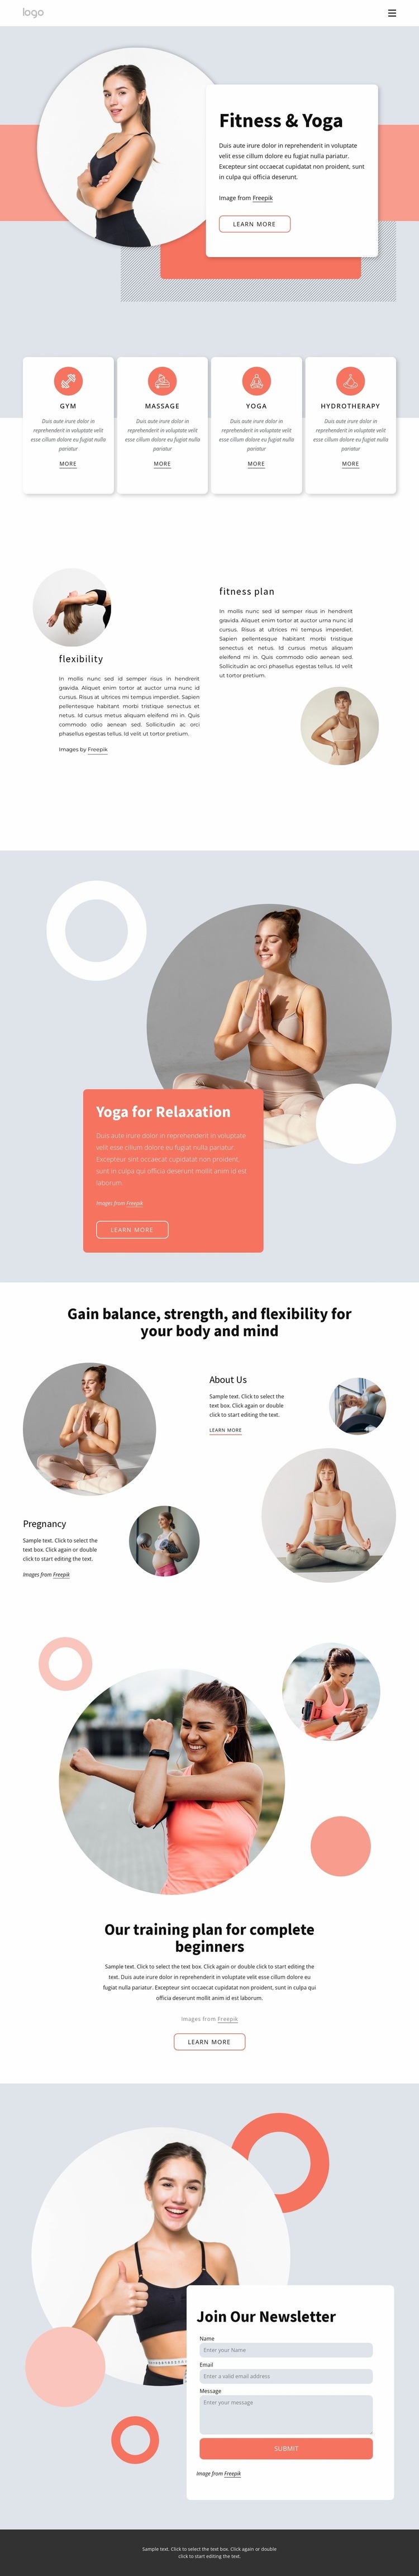 Fitness and yoga Web Page Design